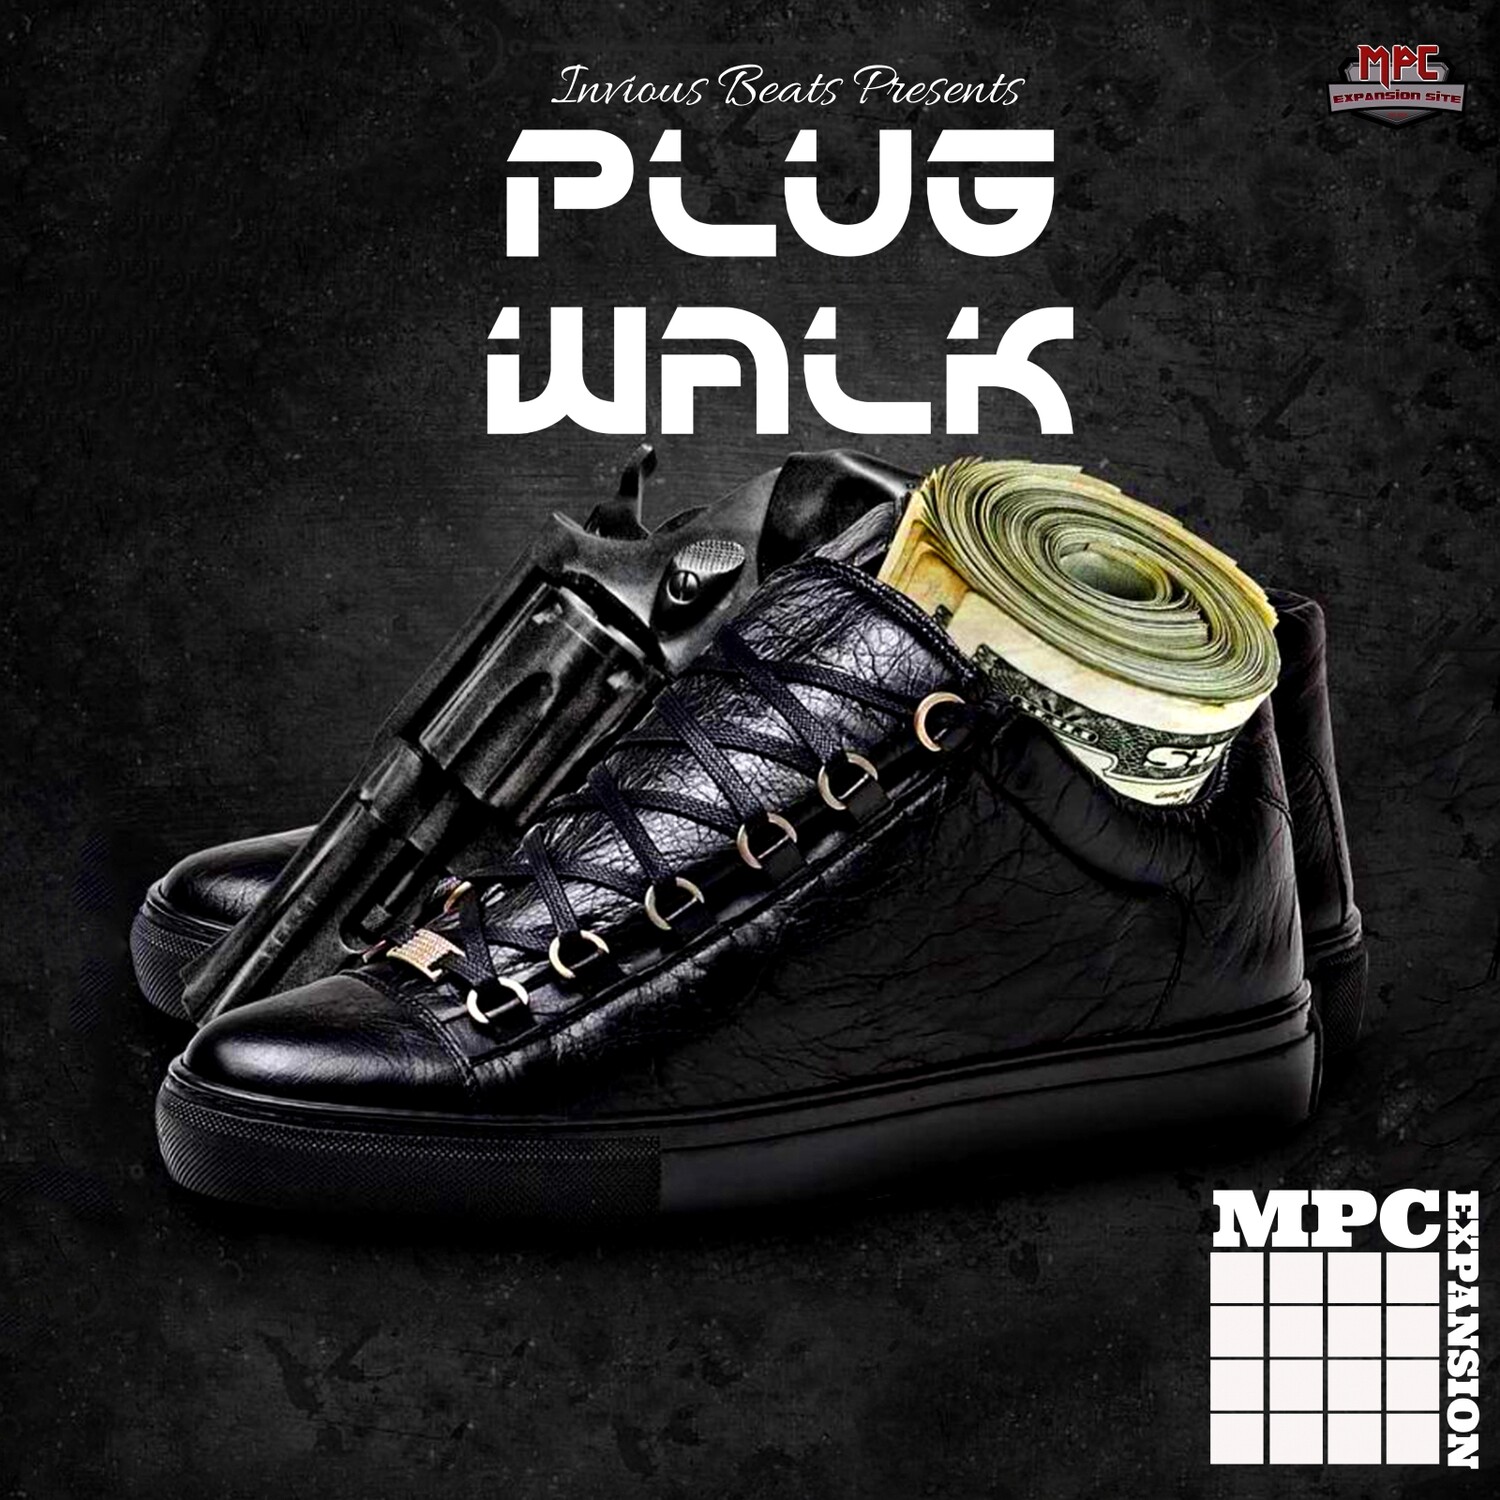 MPC EXPANSION 'PLUG WALK' by INVIOUS